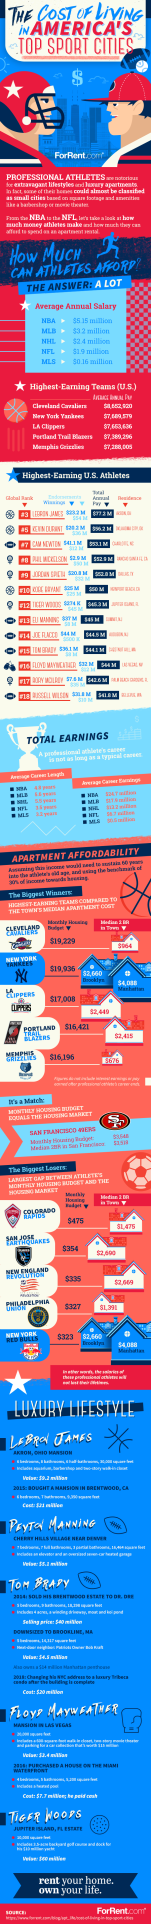 How Much Rent Can Professional Athletes Afford?